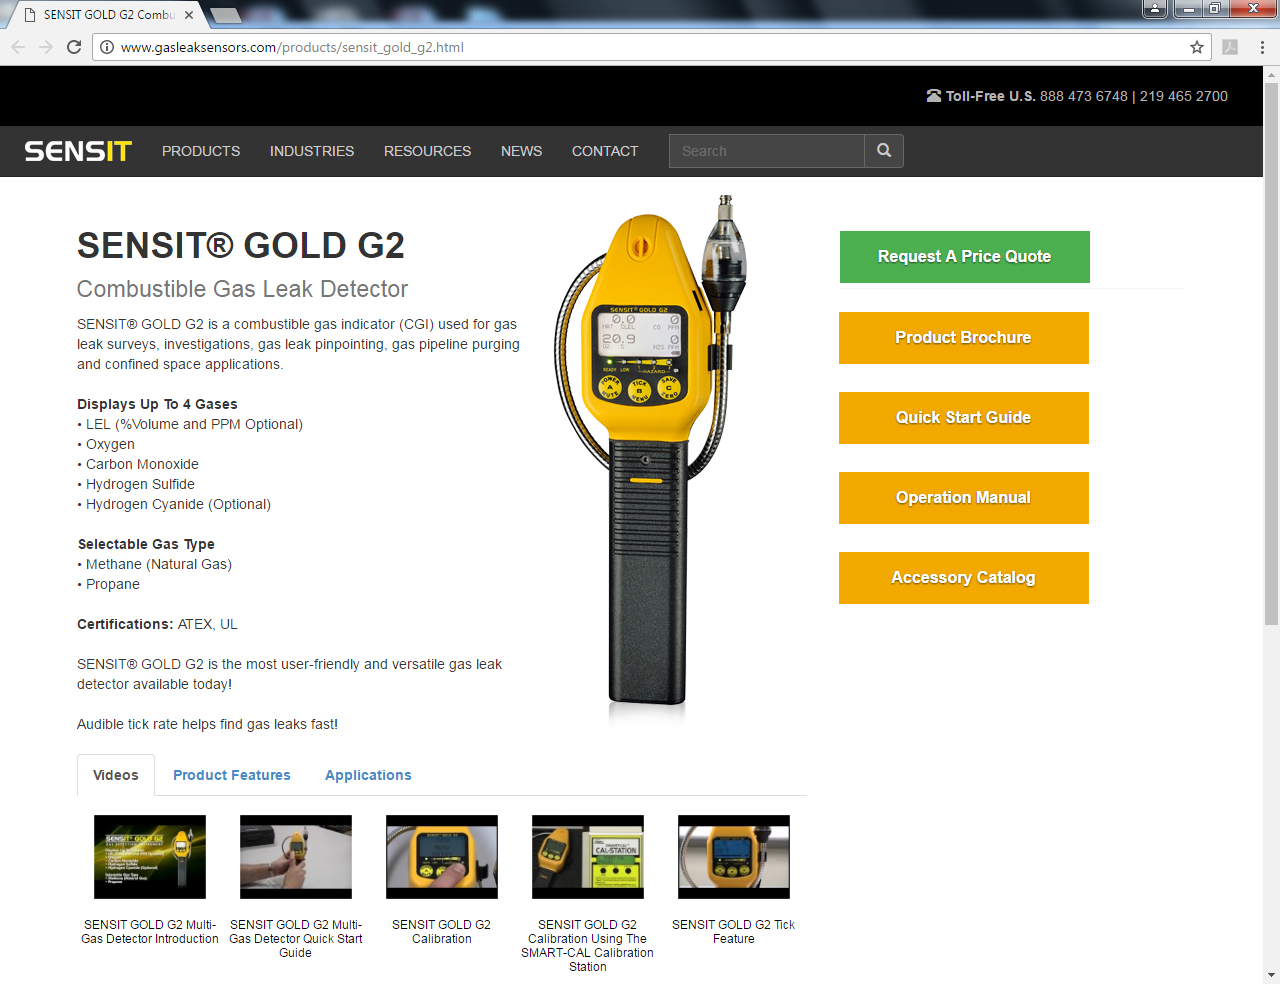 SENSIT GOLD G2 Combustible Gas Leak Detector Product Page